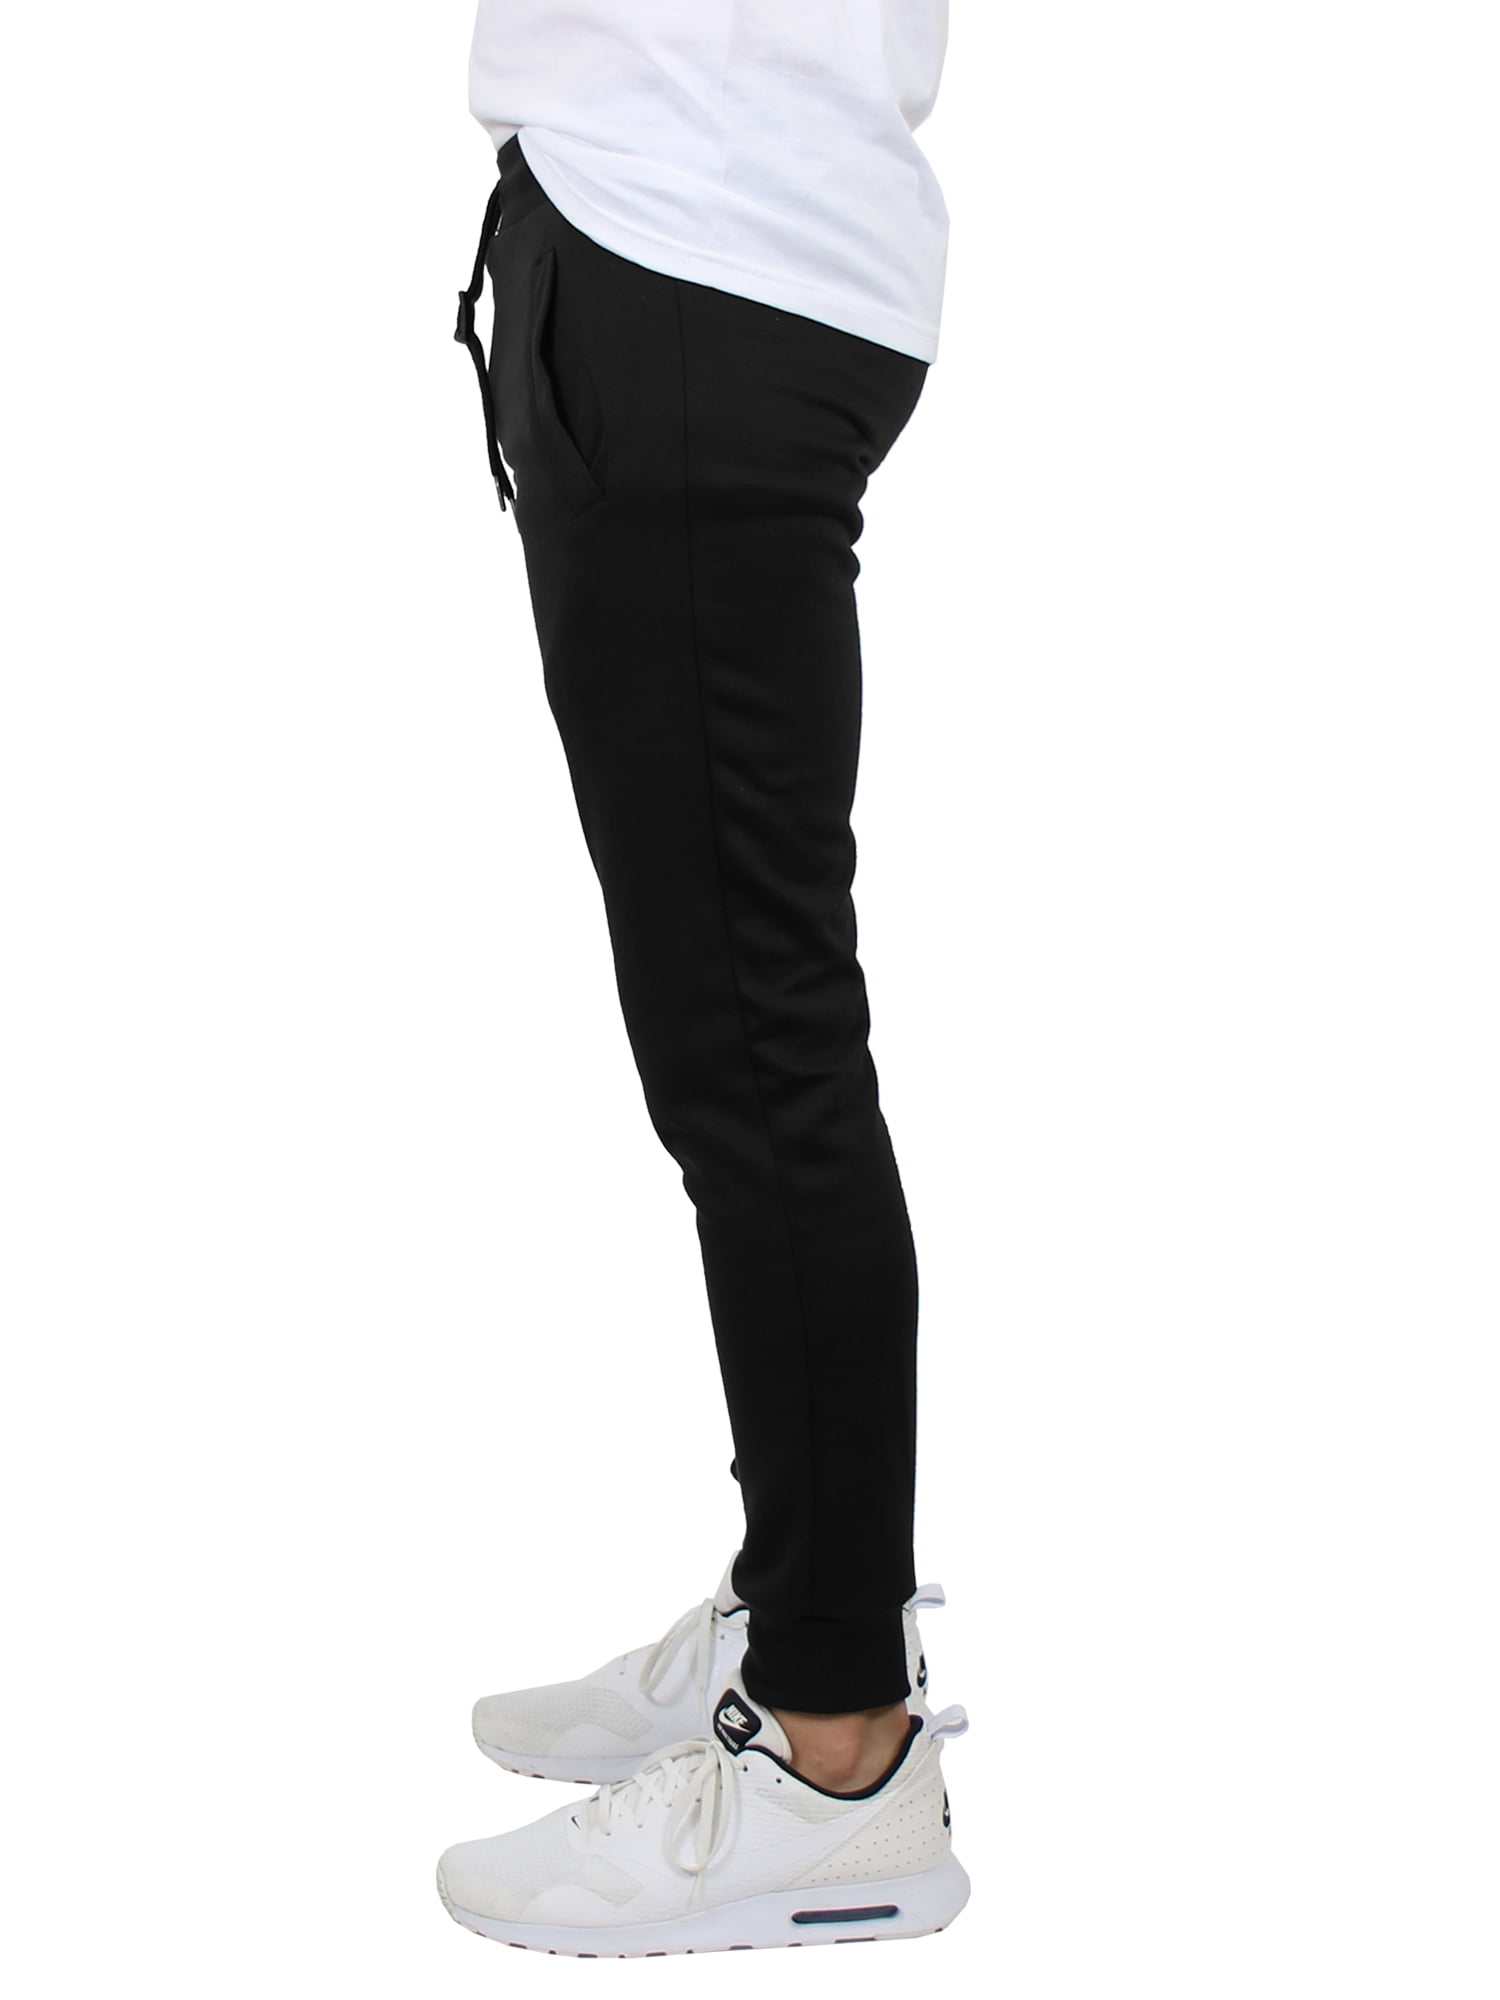 3-Pack Men's Fleece & French Terry Slim-Fit Jogger (Size, S-2XL)